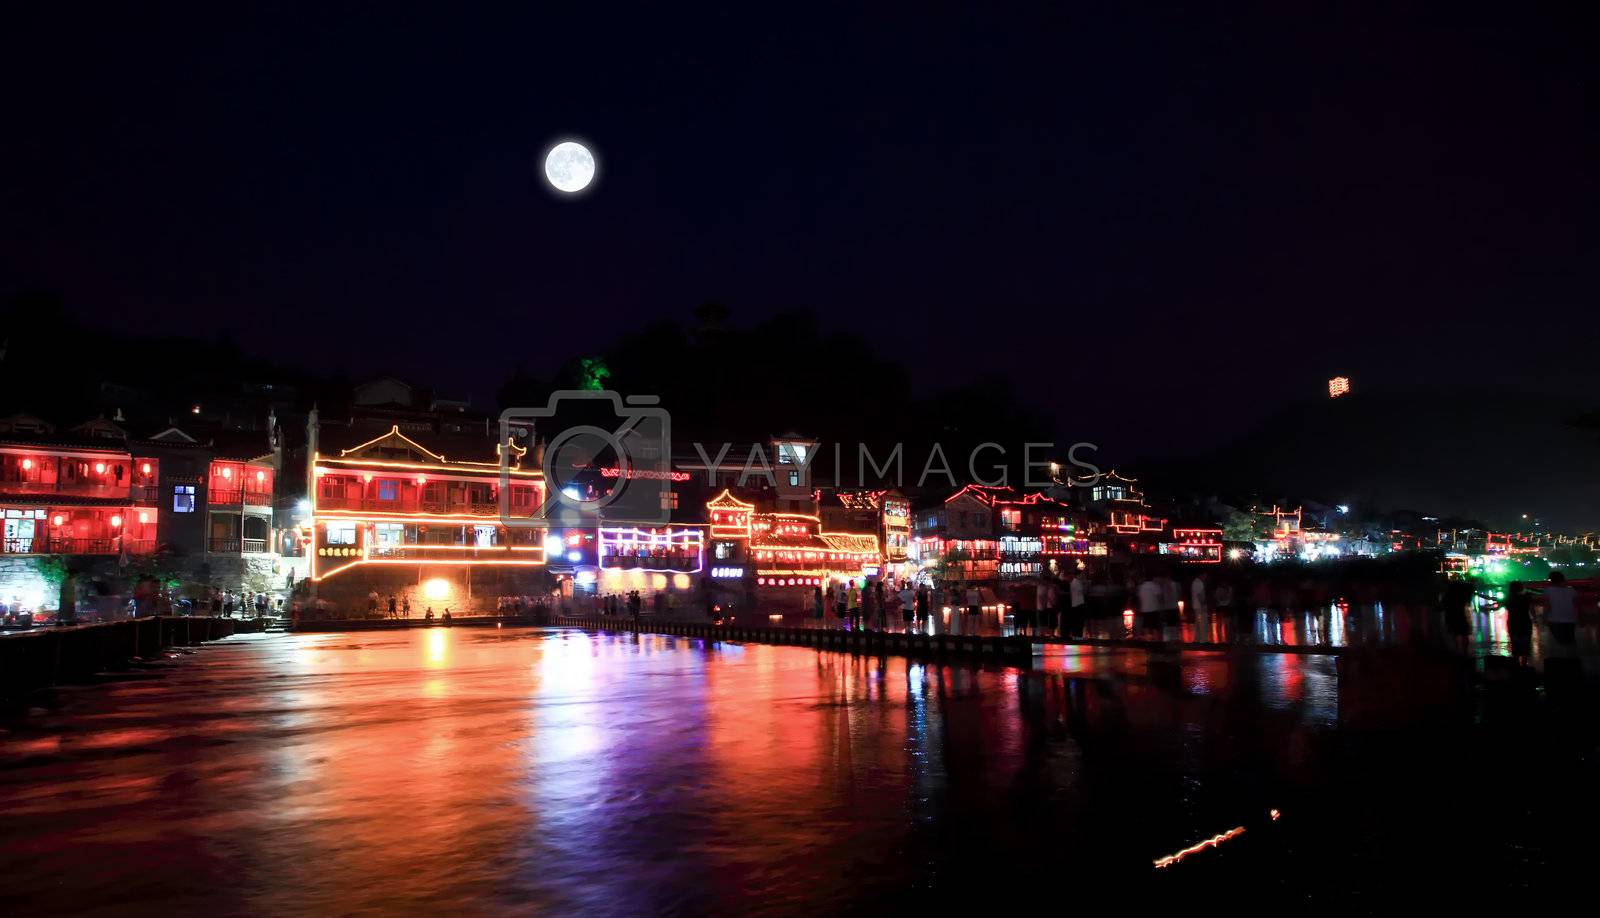 Royalty free image of night scenery of the Phoenix Town in China by gary718